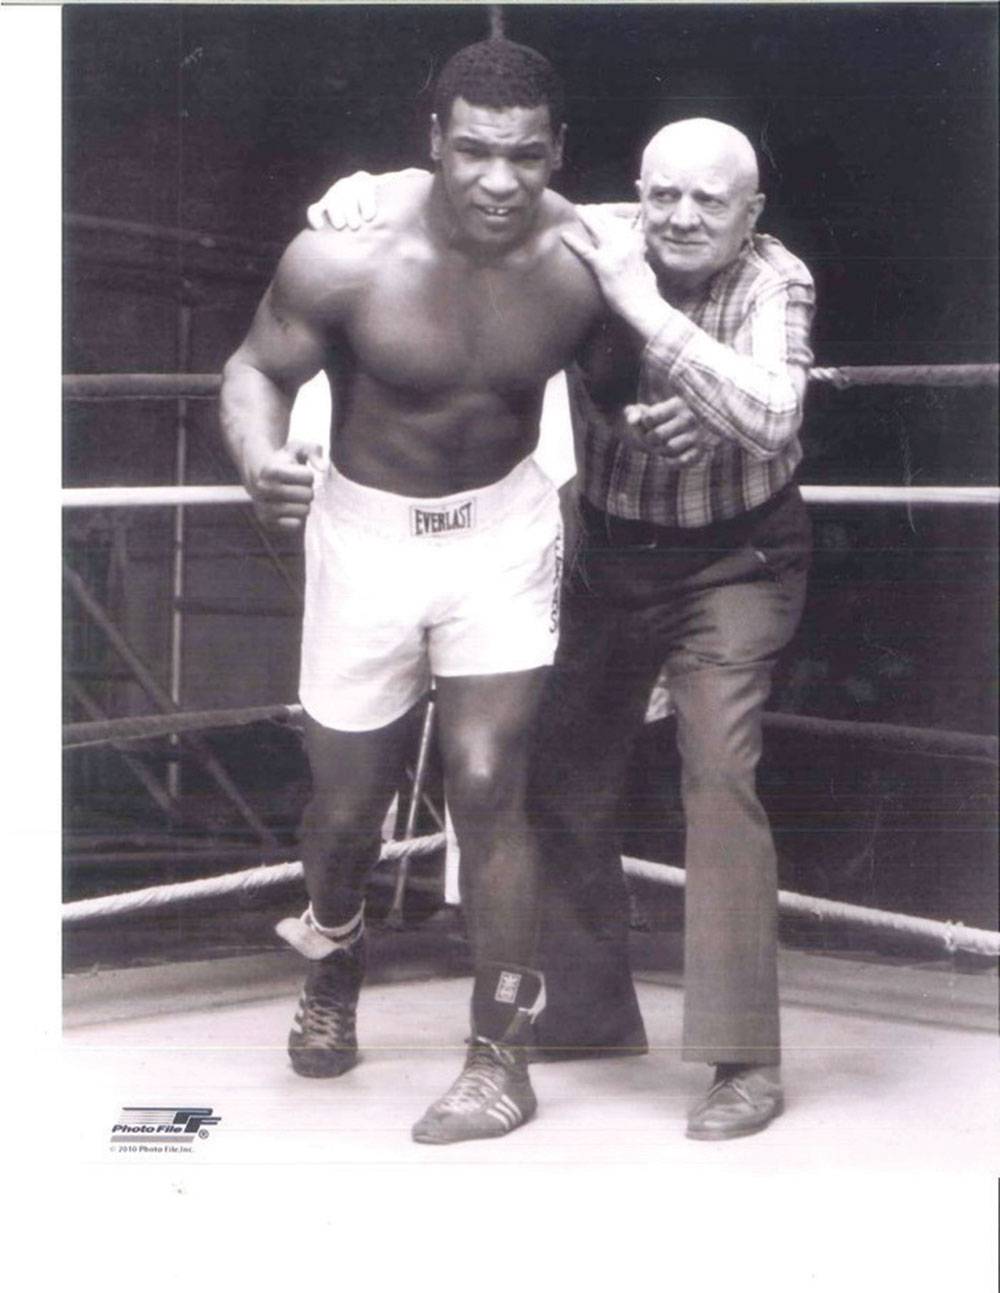 Tyson (age 17) with his boxing trainer and mentor, Cus D’Amato